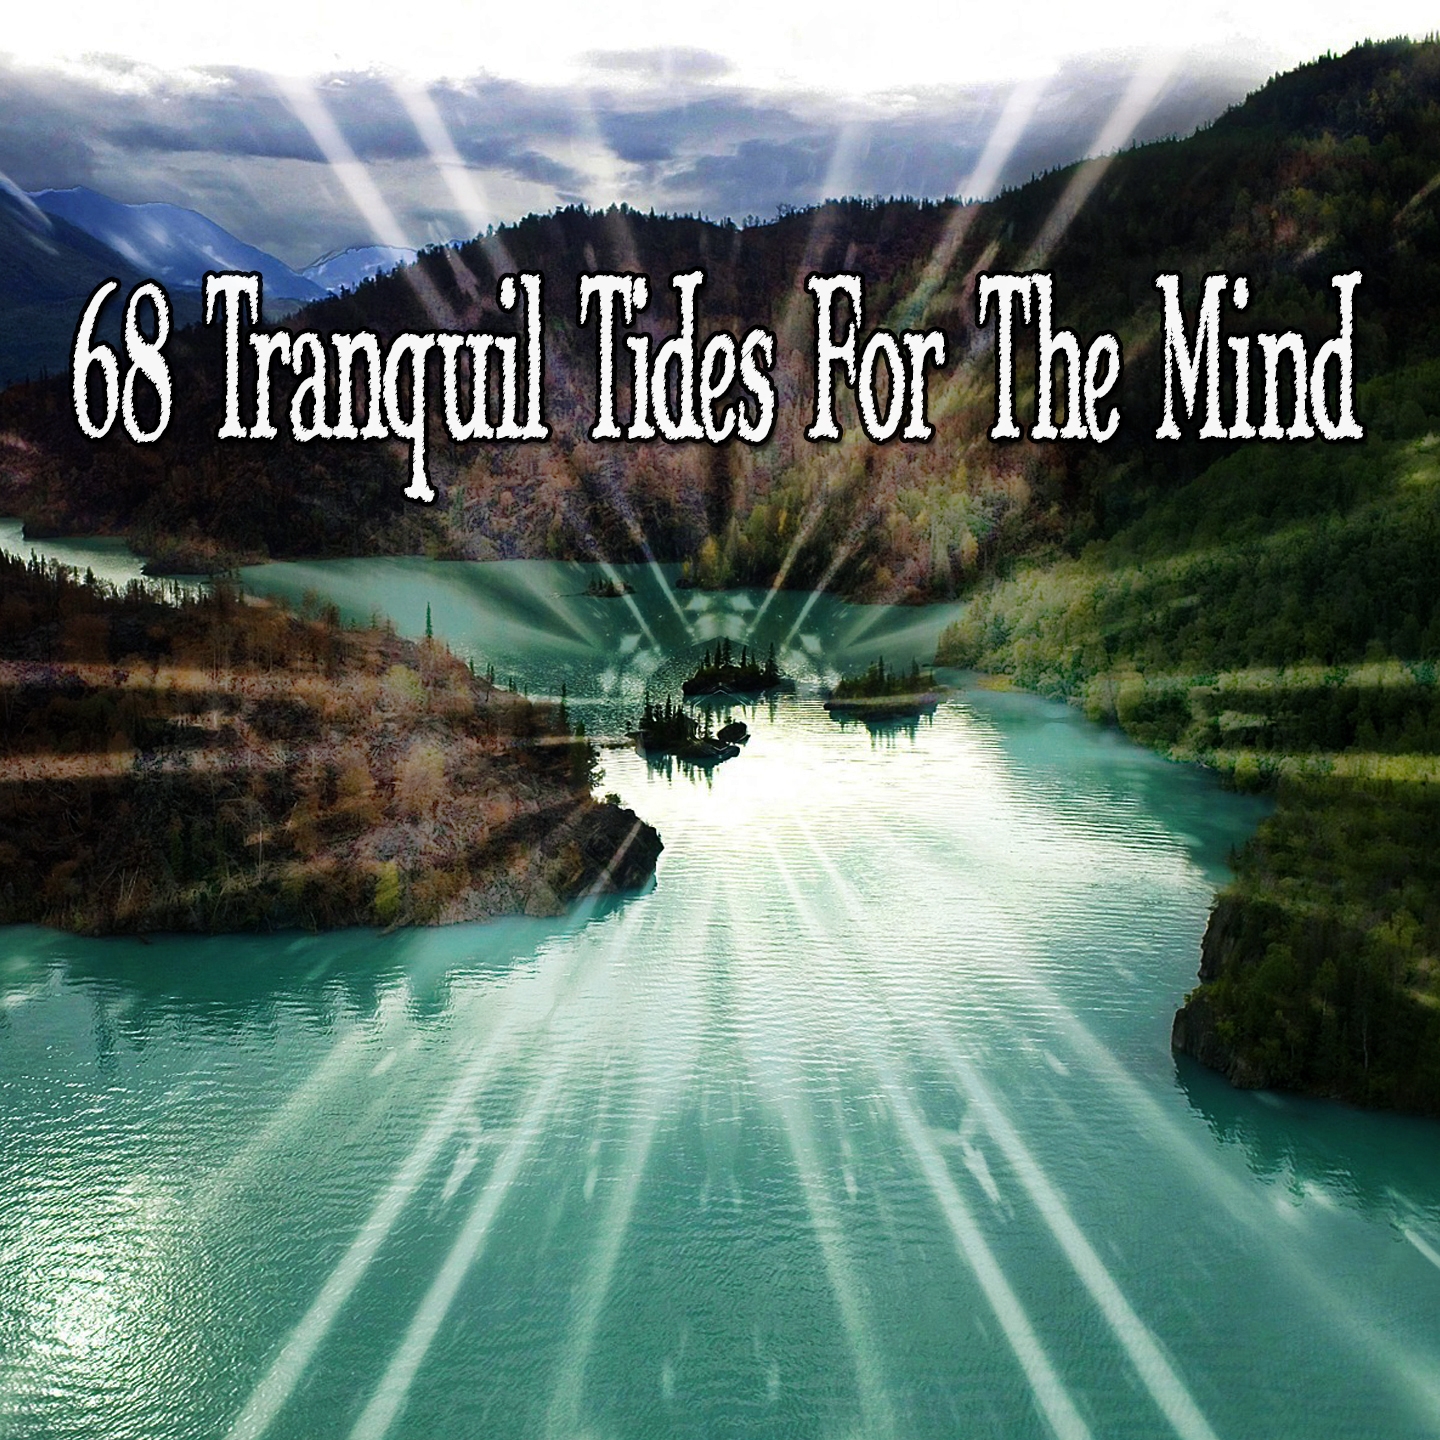 68 Tranquil Tides For The Mind